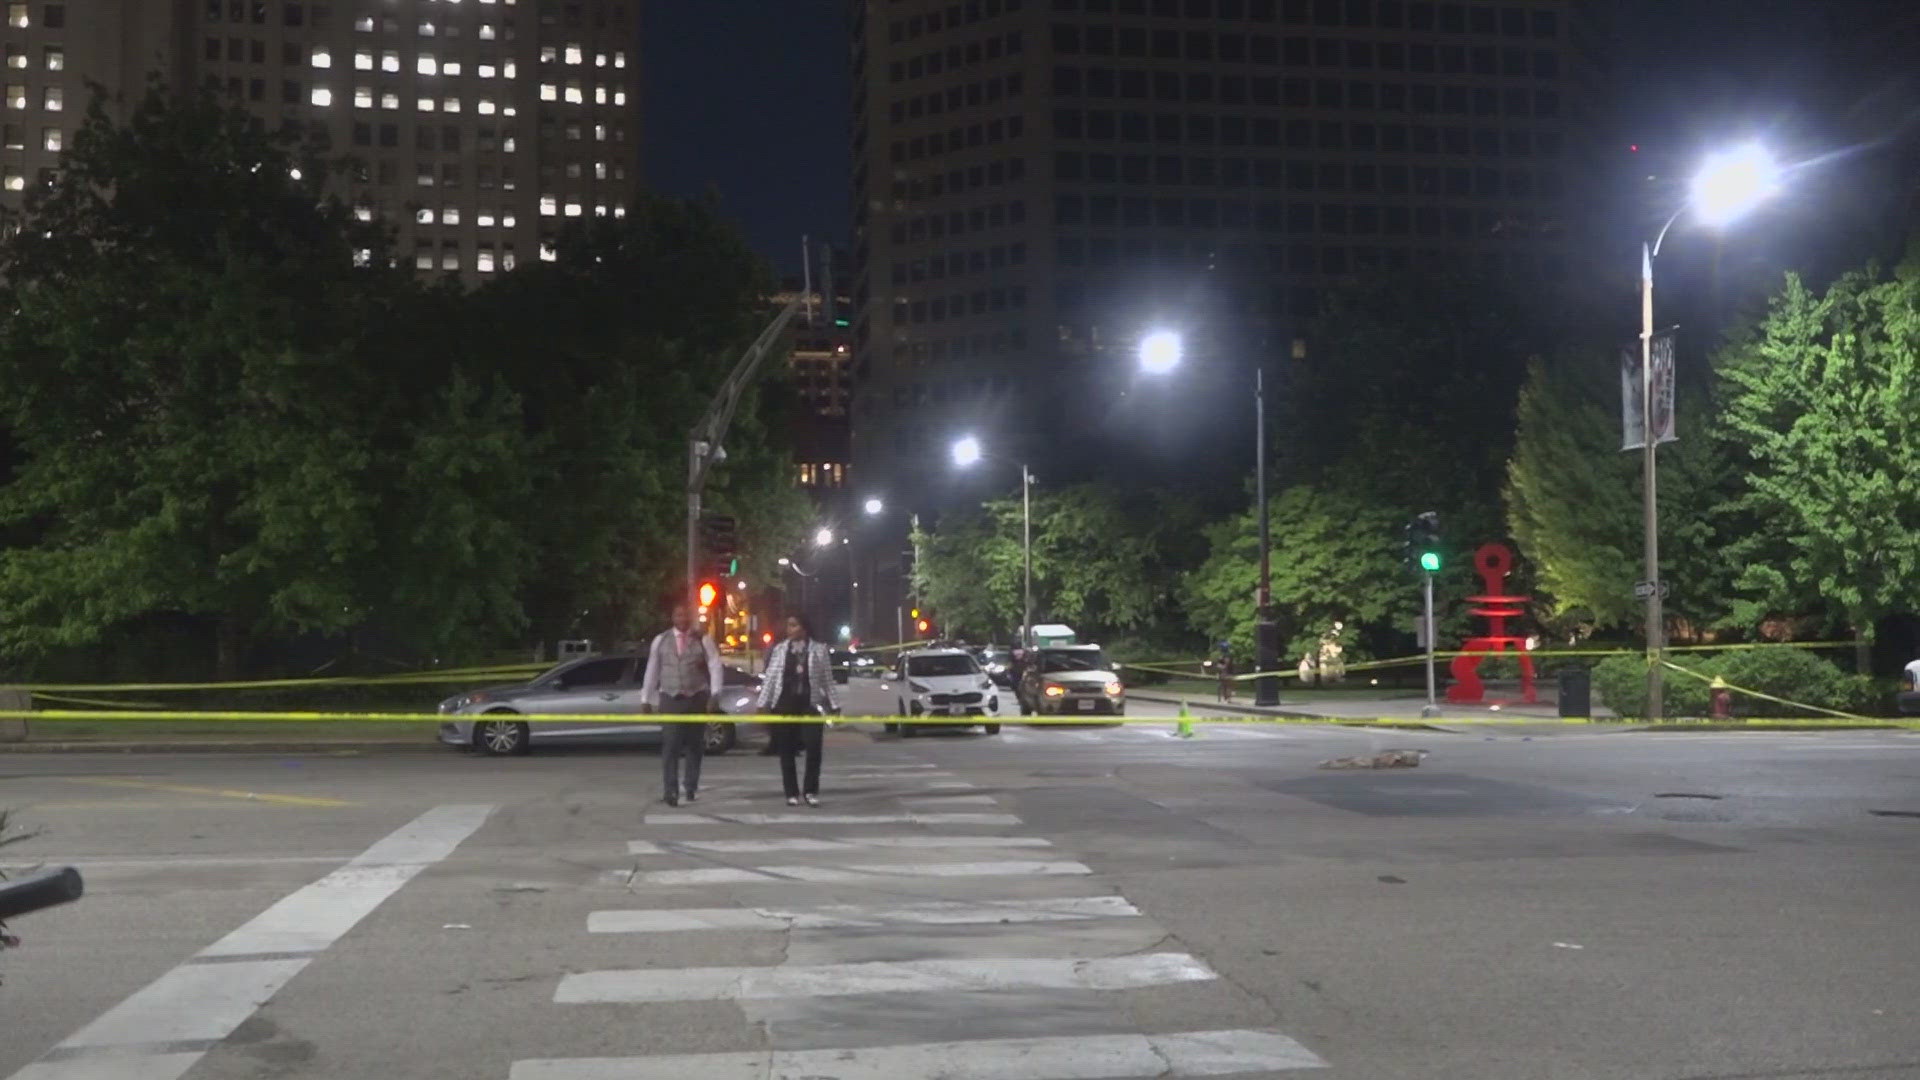 Local leaders are sounding off about safety downtown. This after a fight turned into a deadly shooting at Market Street and 10th over the weekend.